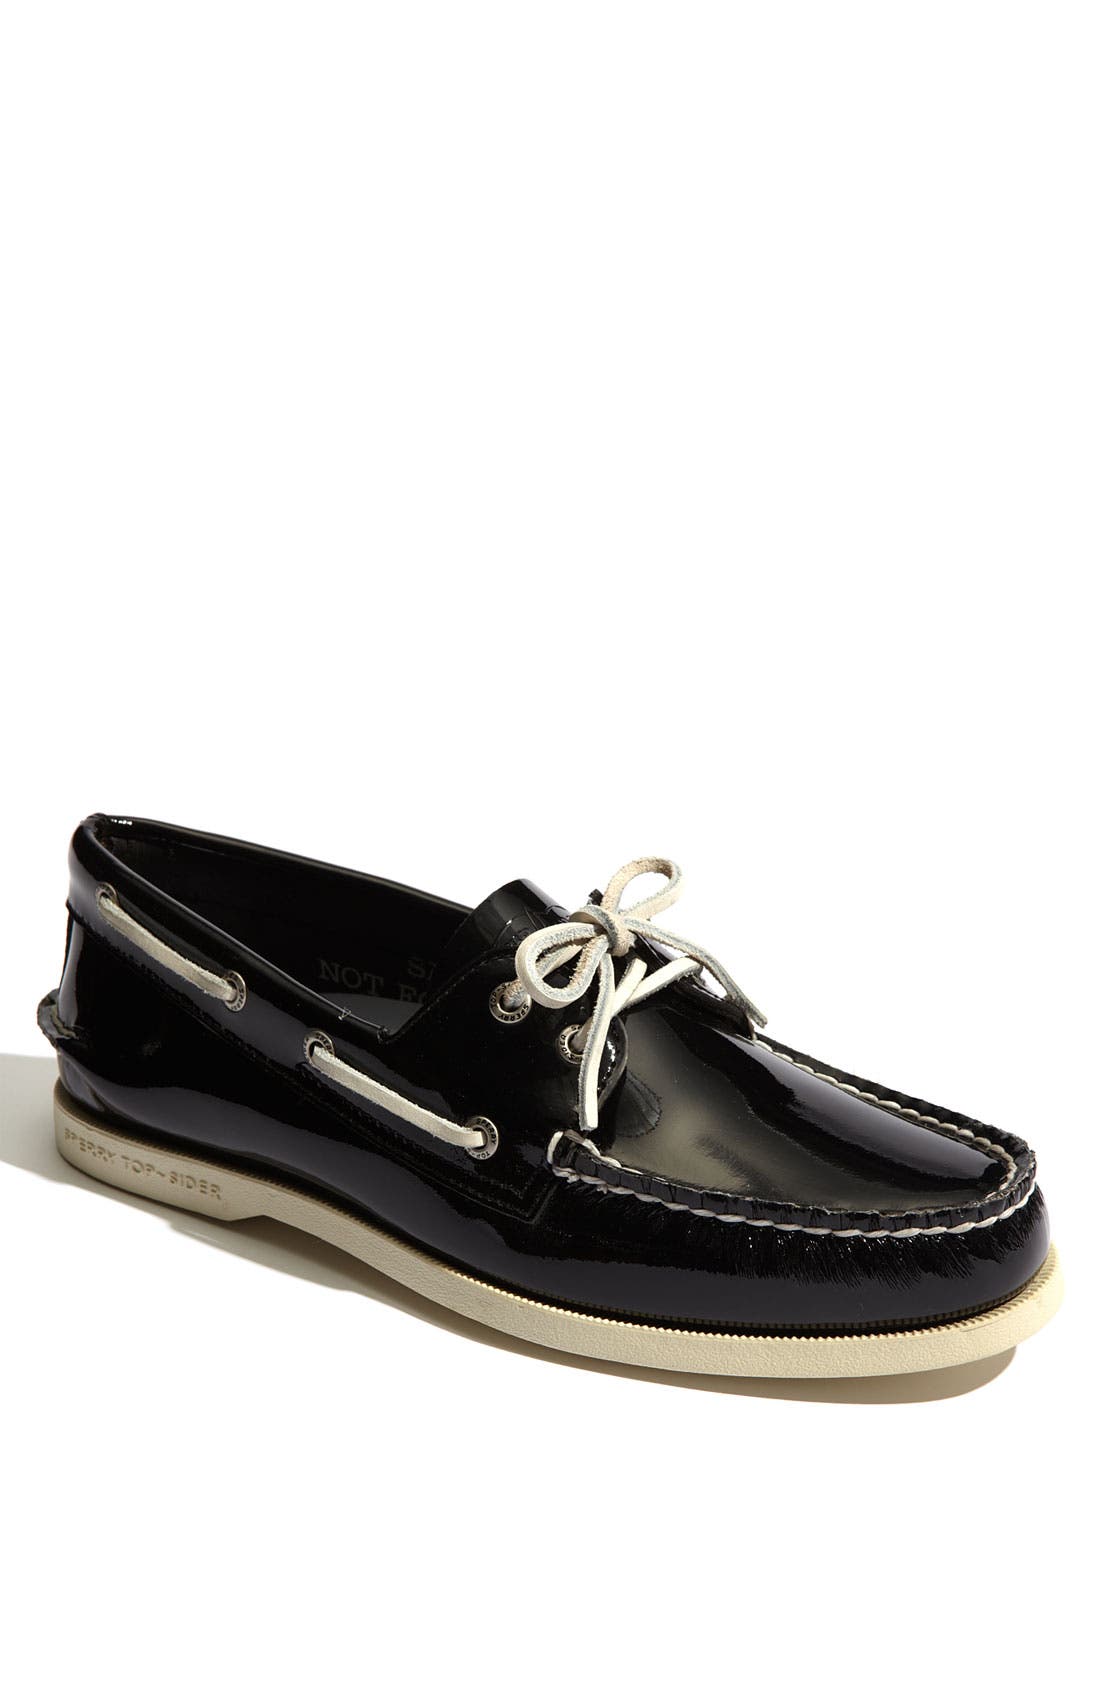 sperry black patent leather loafers